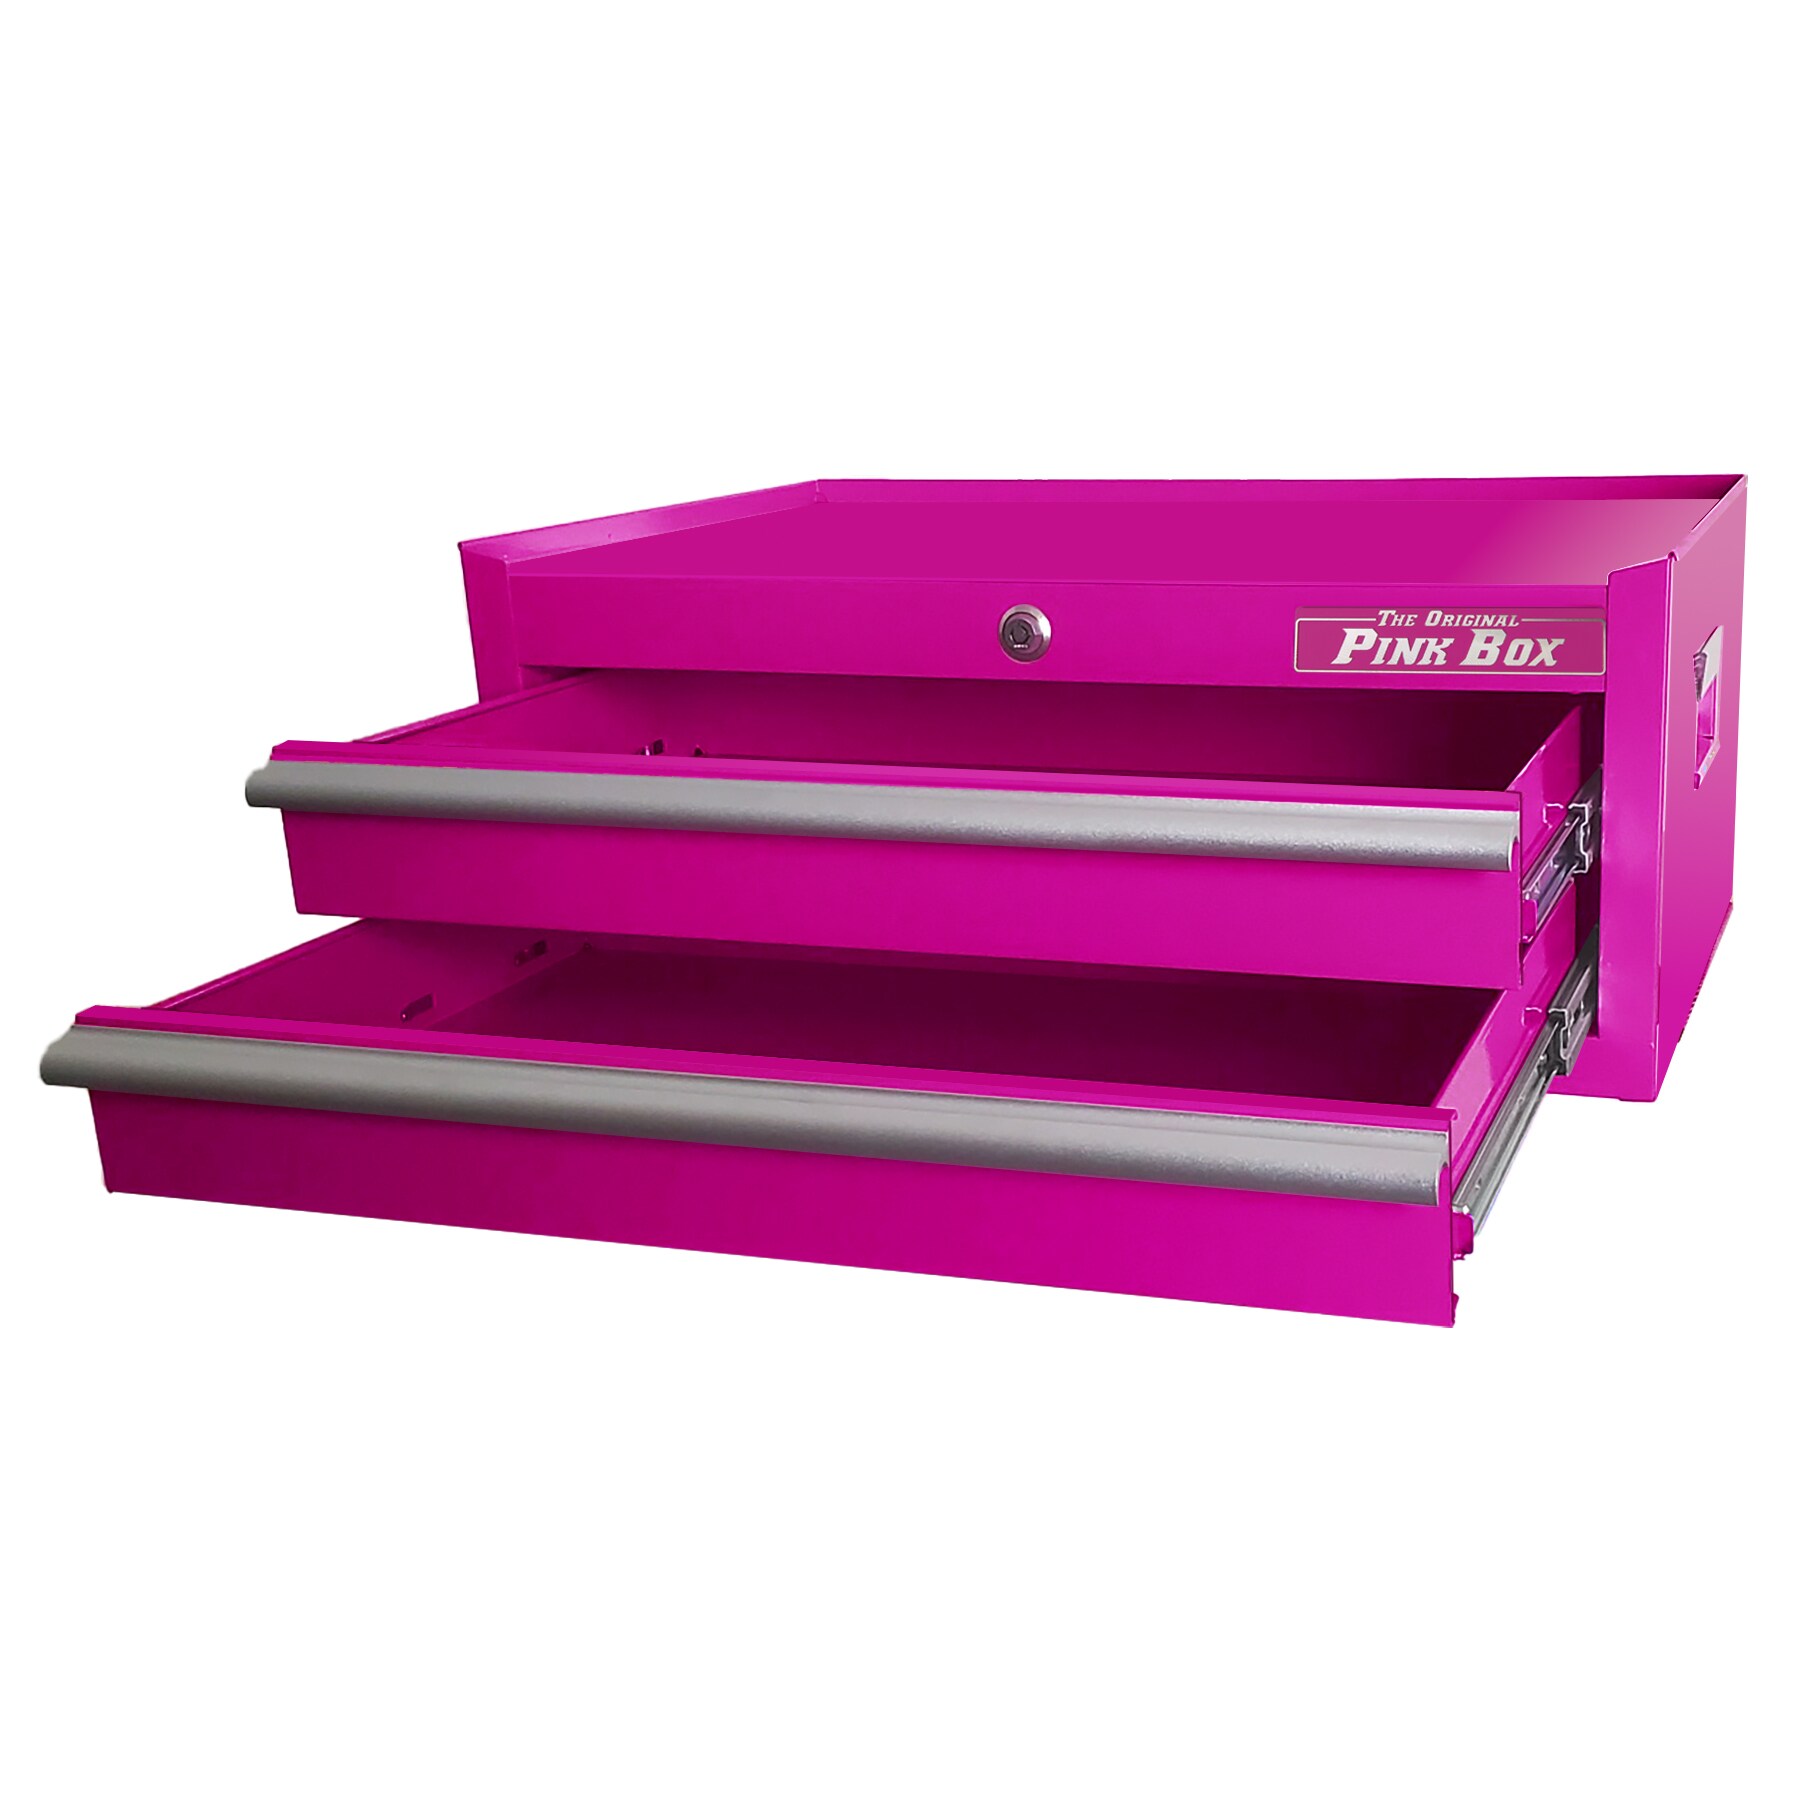 The Original Pink Box 26-in W x 16.75-in H 3-Drawer Steel Tool